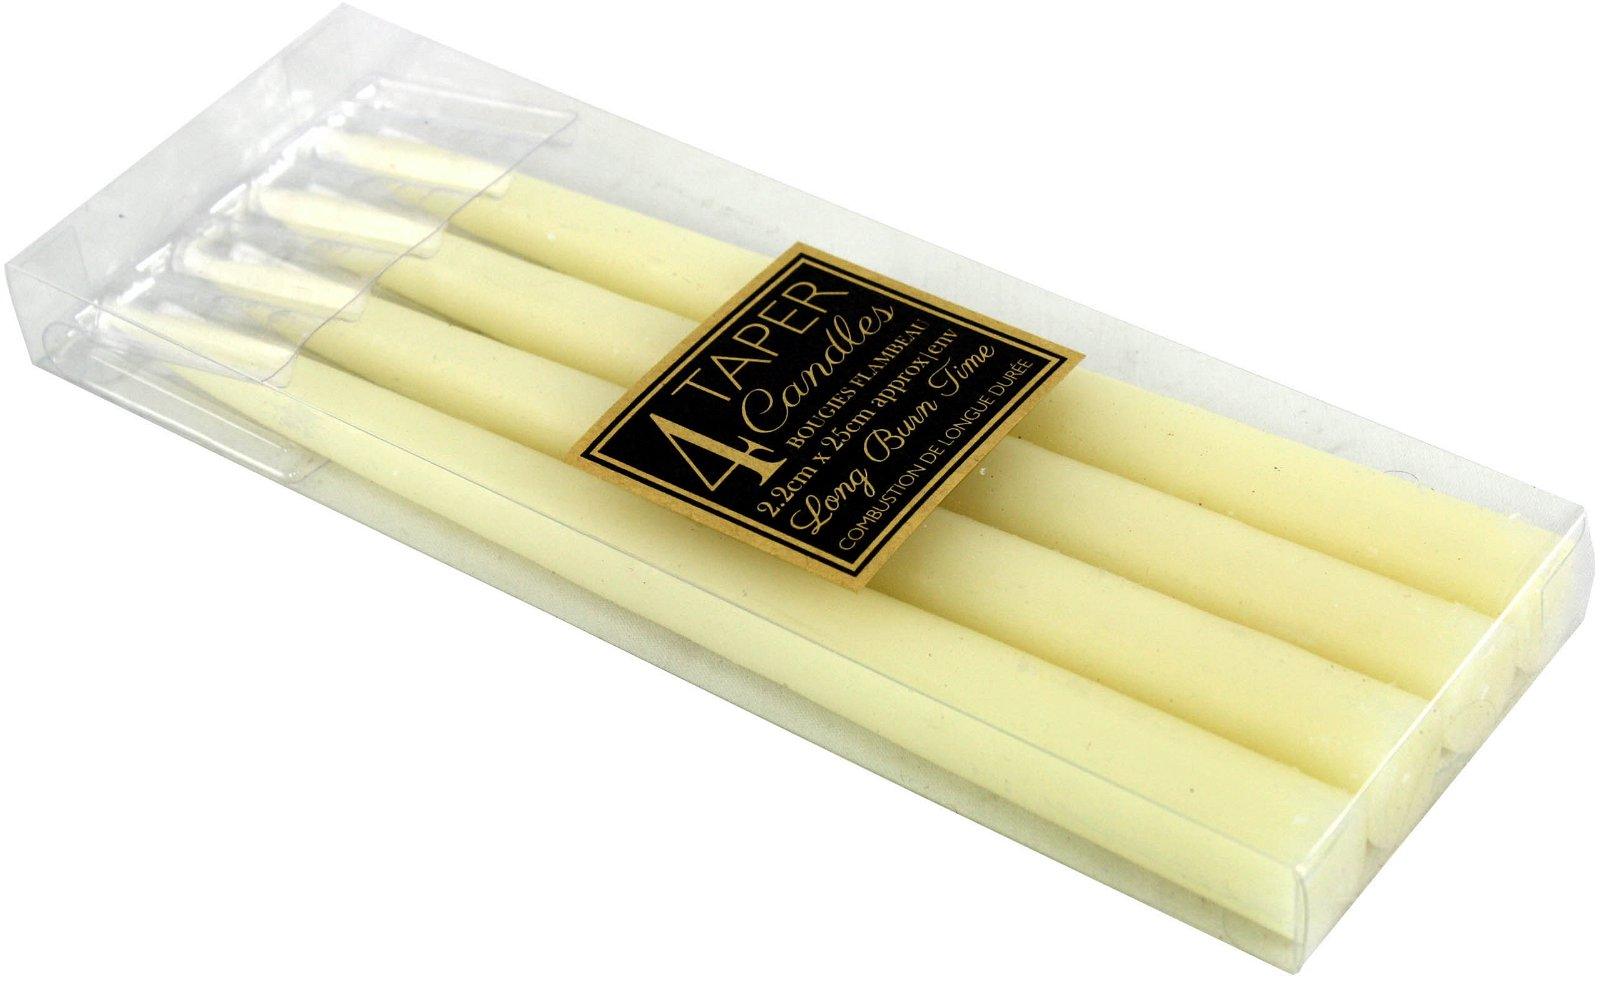 Set Of 4 Ivory Taper Candles - £12.99 - Candles 